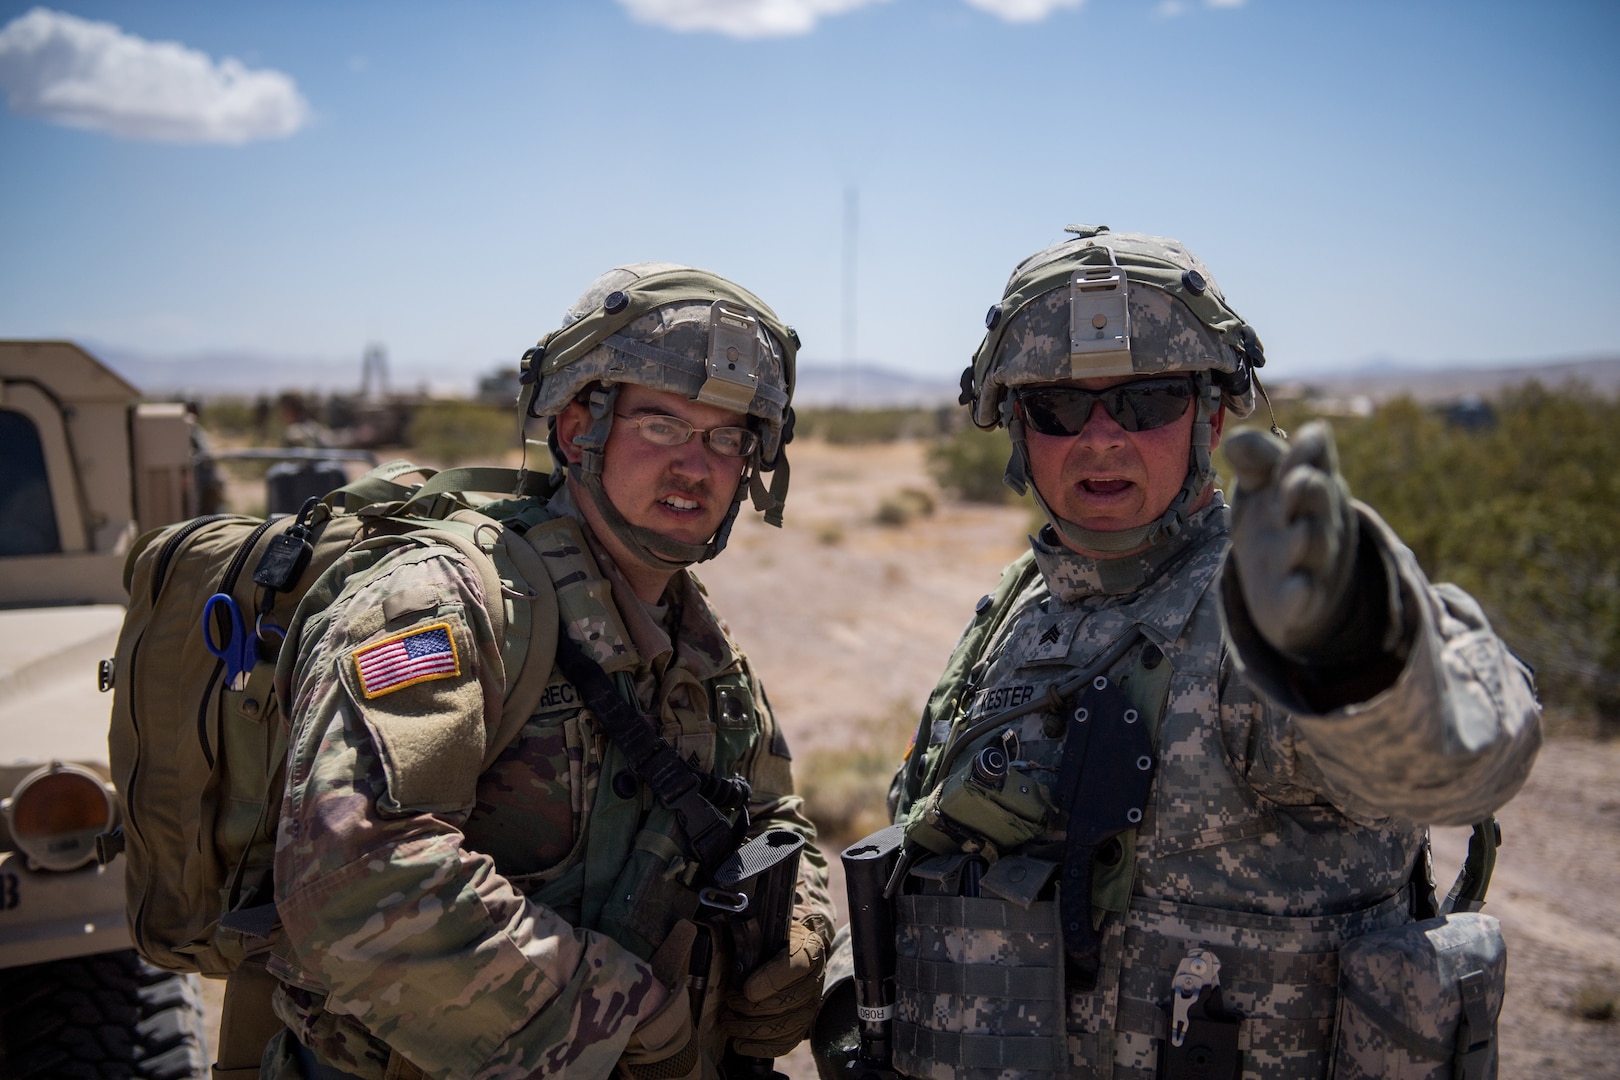 Kansas Army National Guard Sgt. Kenneth Kester and Sgt. Christopher Rectenwald, 242nd Engineer Company, discusses the outer perimeter of the tactical assembly area June 1, 2019, at Fort Irwin, California. Rectenwald is assigned to the 242nd Engineer Company as a 68W combat medic.